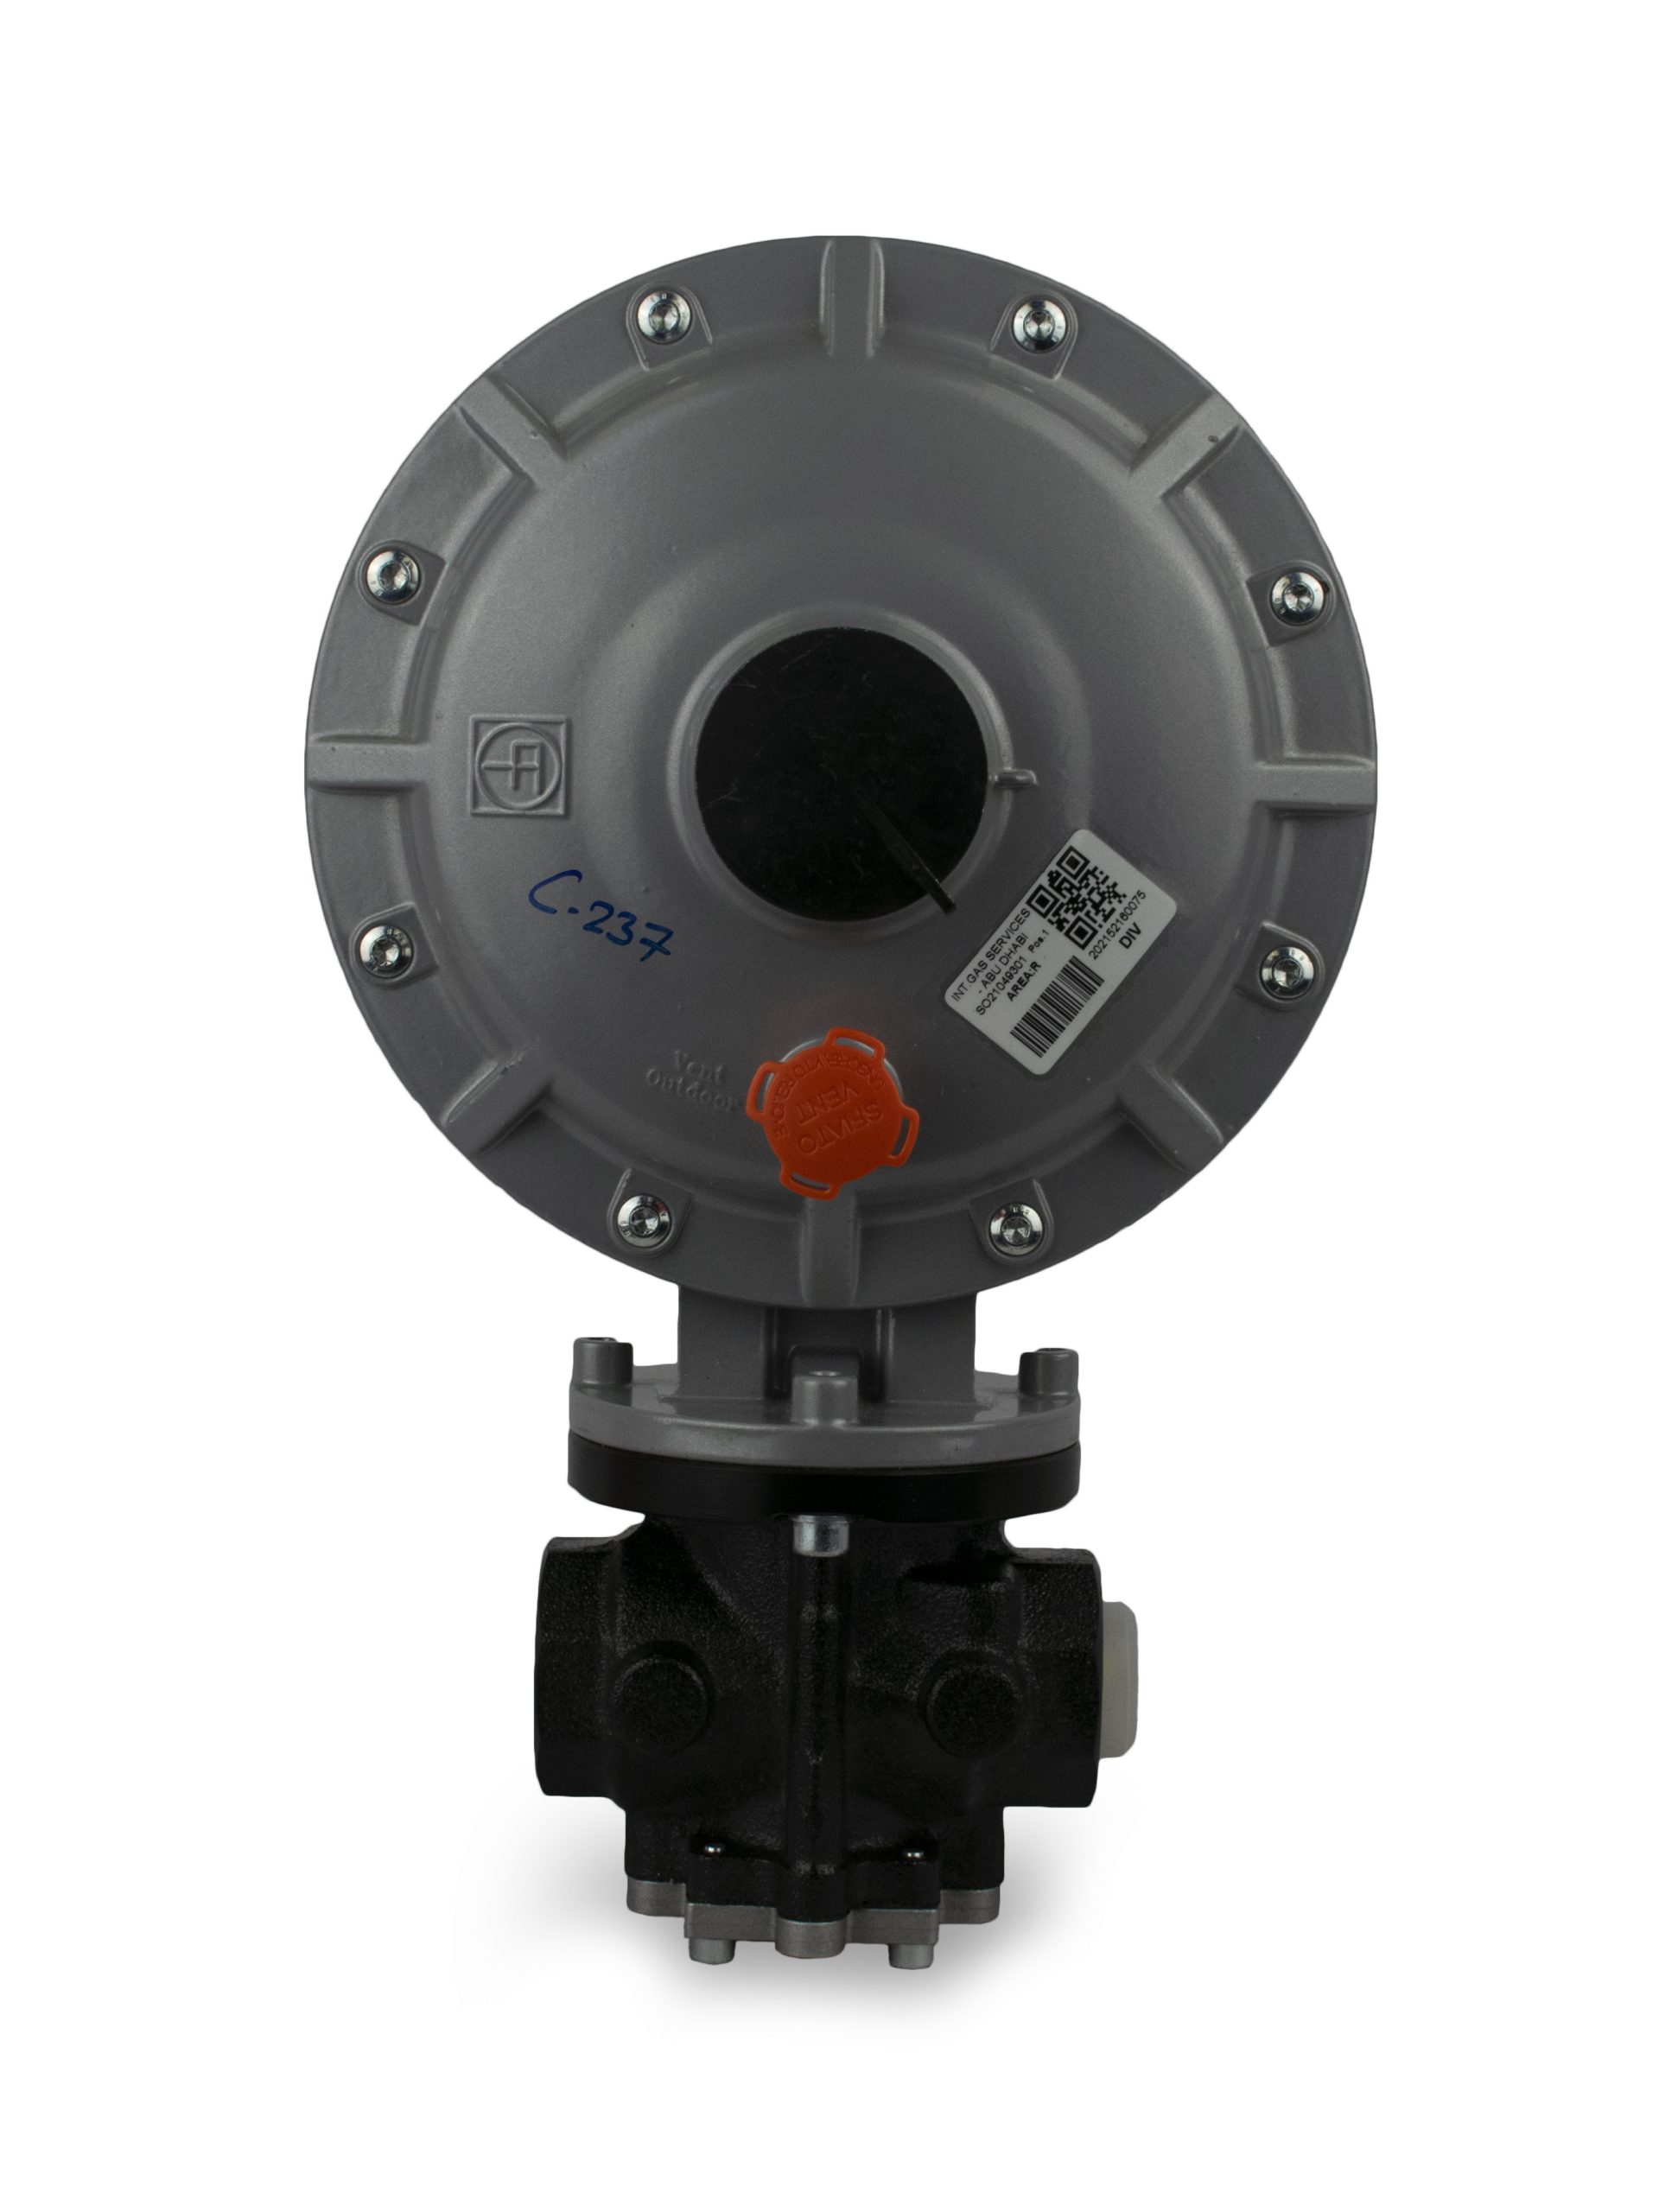 ACTIVE REGULATOR DIVAL 500 DN1 Inches WITHOUT UPSO OR OPSO, from Gas Equipment Company Llc Abu Dhabi, UNITED ARAB EMIRATES